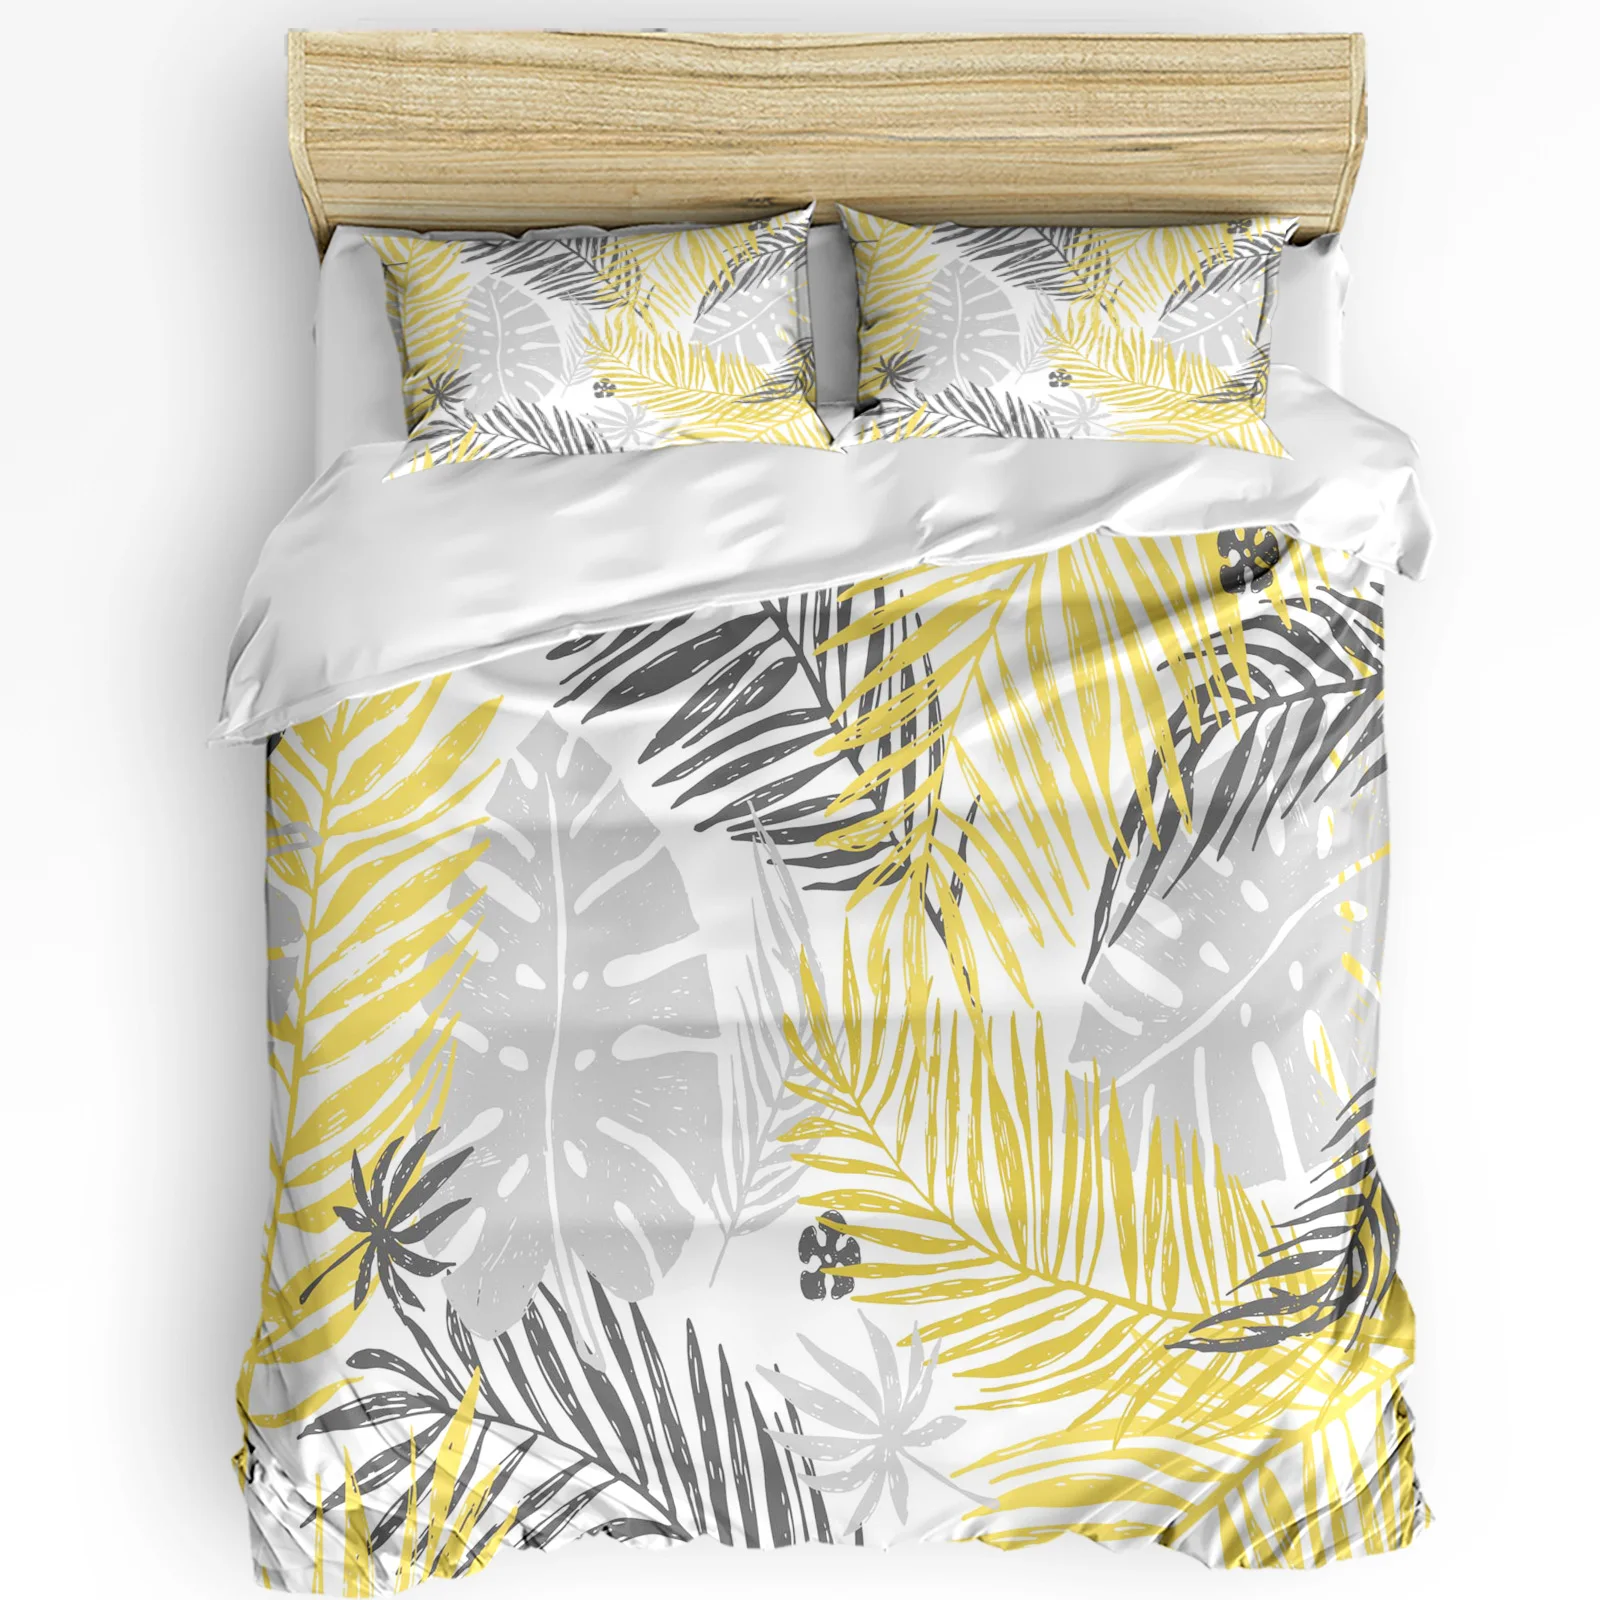 

Palm Leaves Yellow Gray Printed Comfort Duvet Cover Pillow Case Home Textile Quilt Cover Boy Kid Teen Girl 3pcs Bedding Set